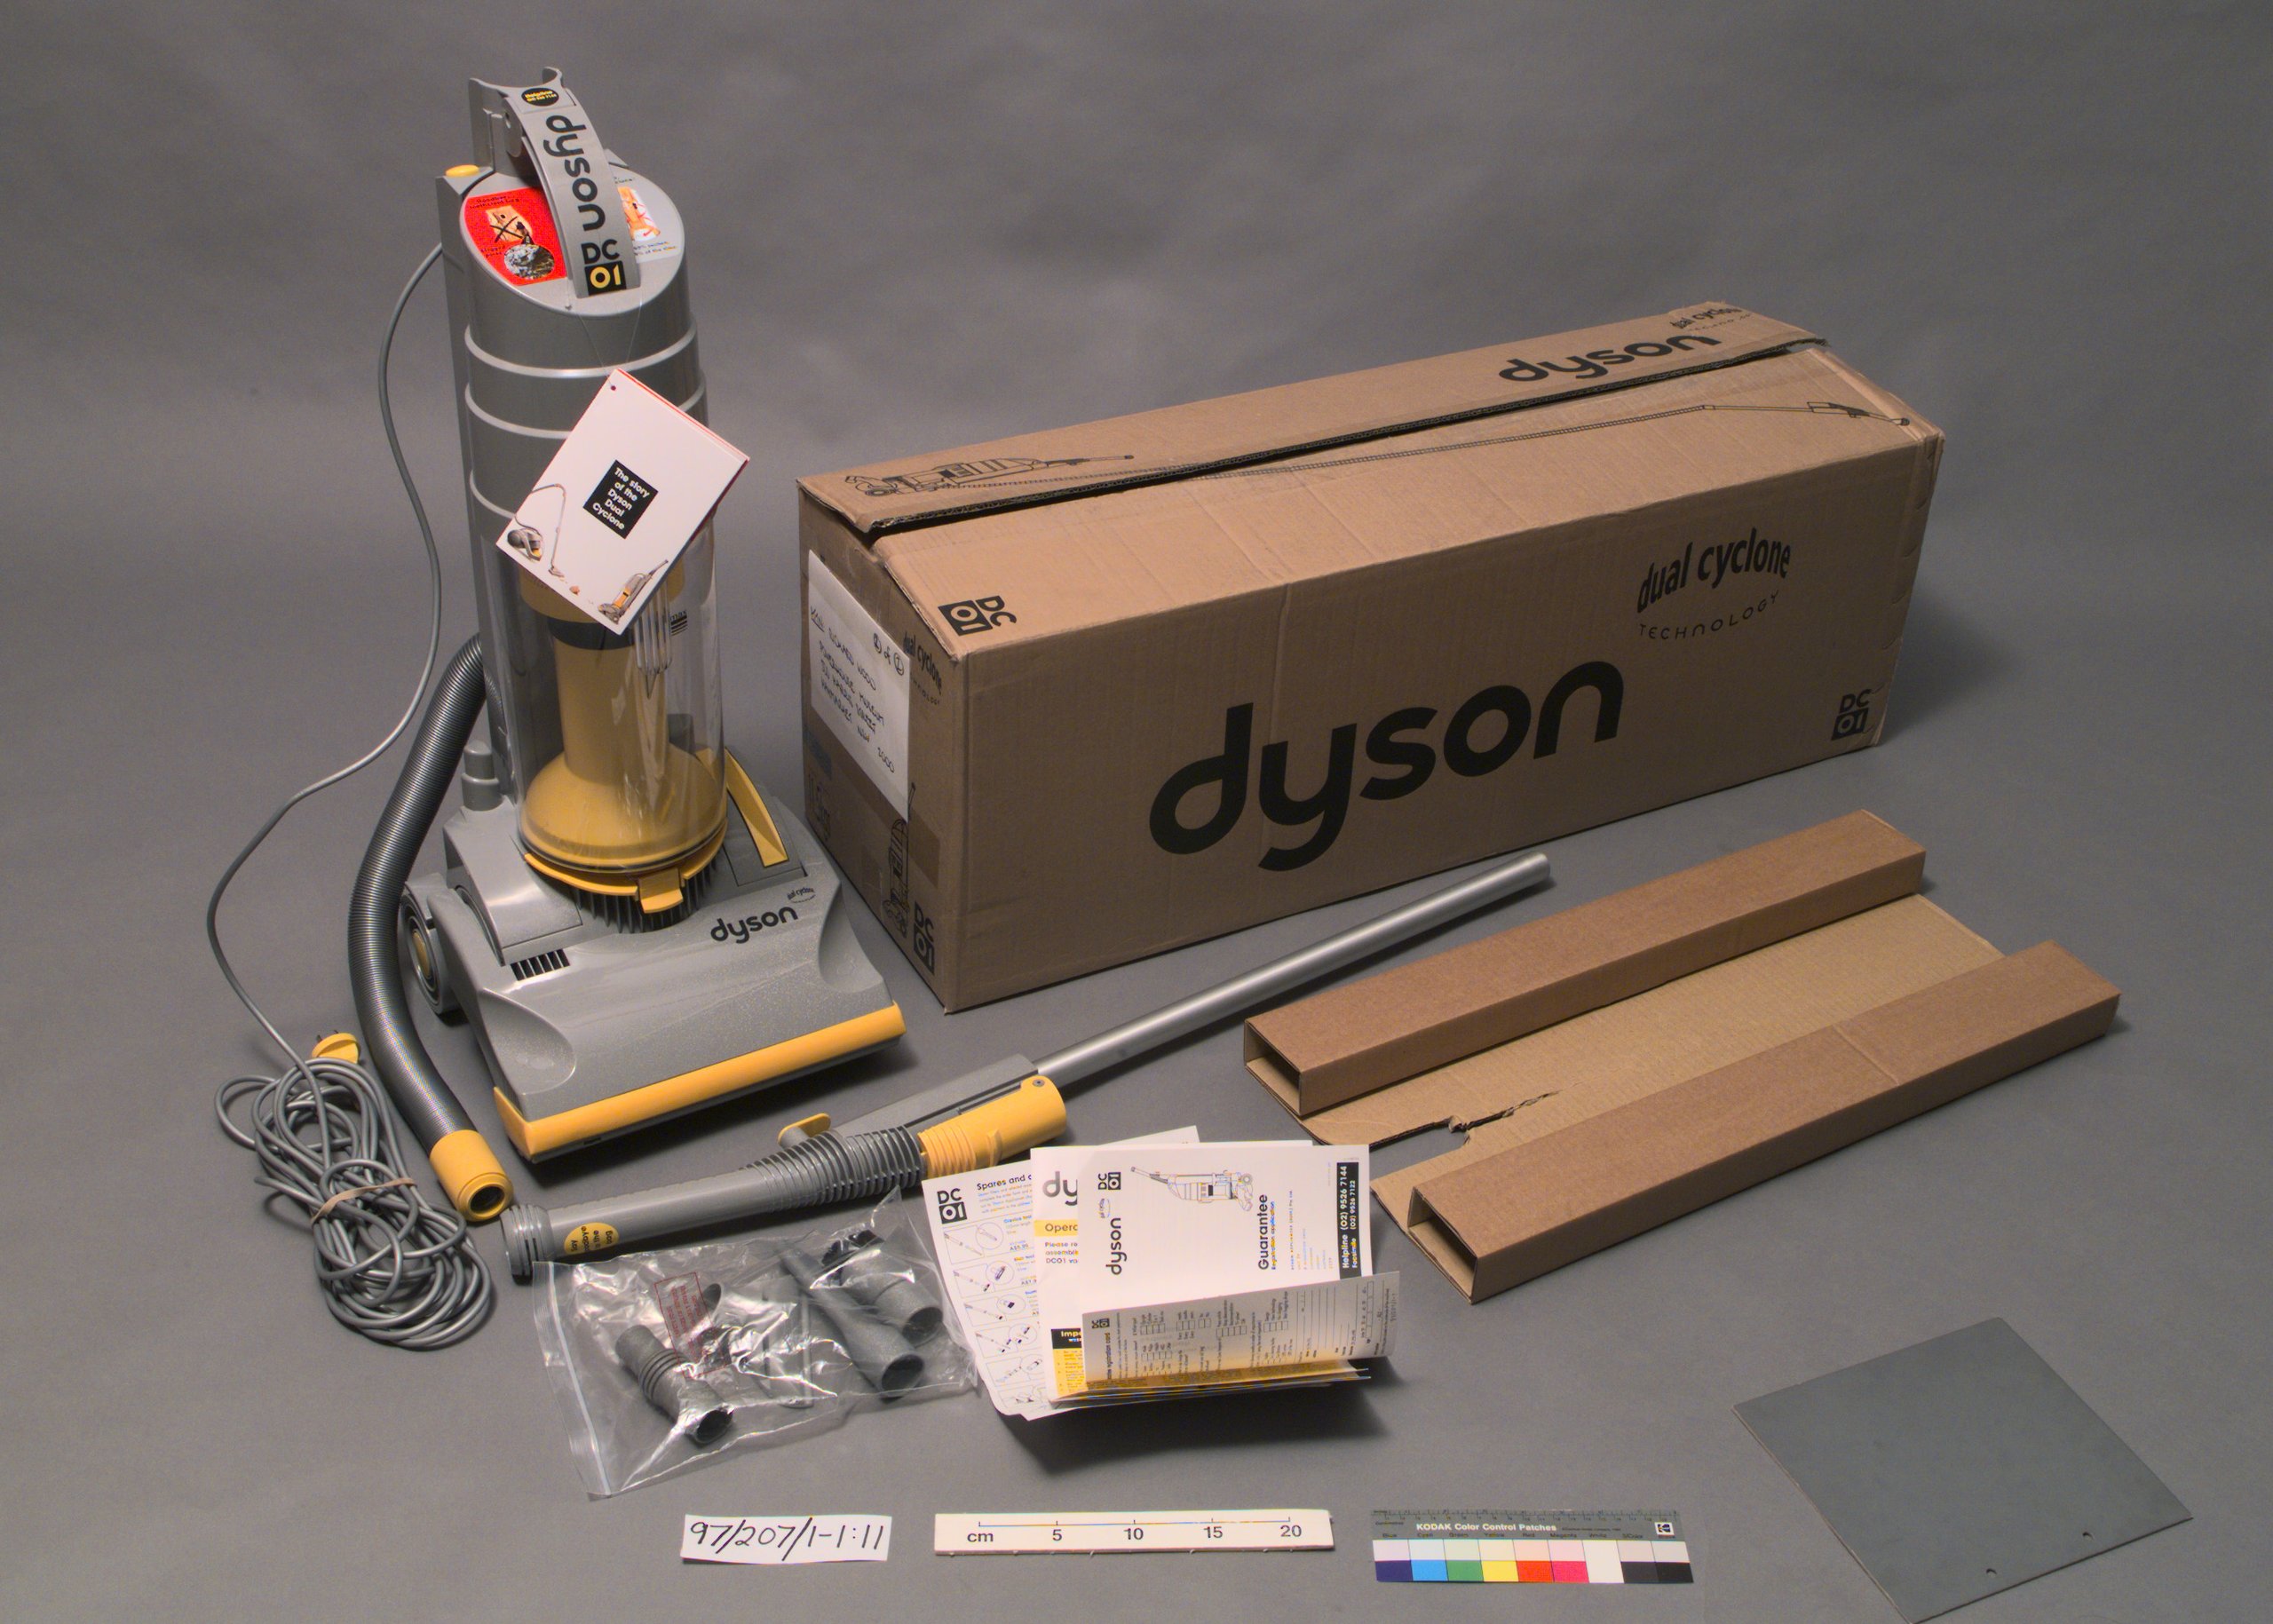 Dyson DC01 upright vacuum cleaner